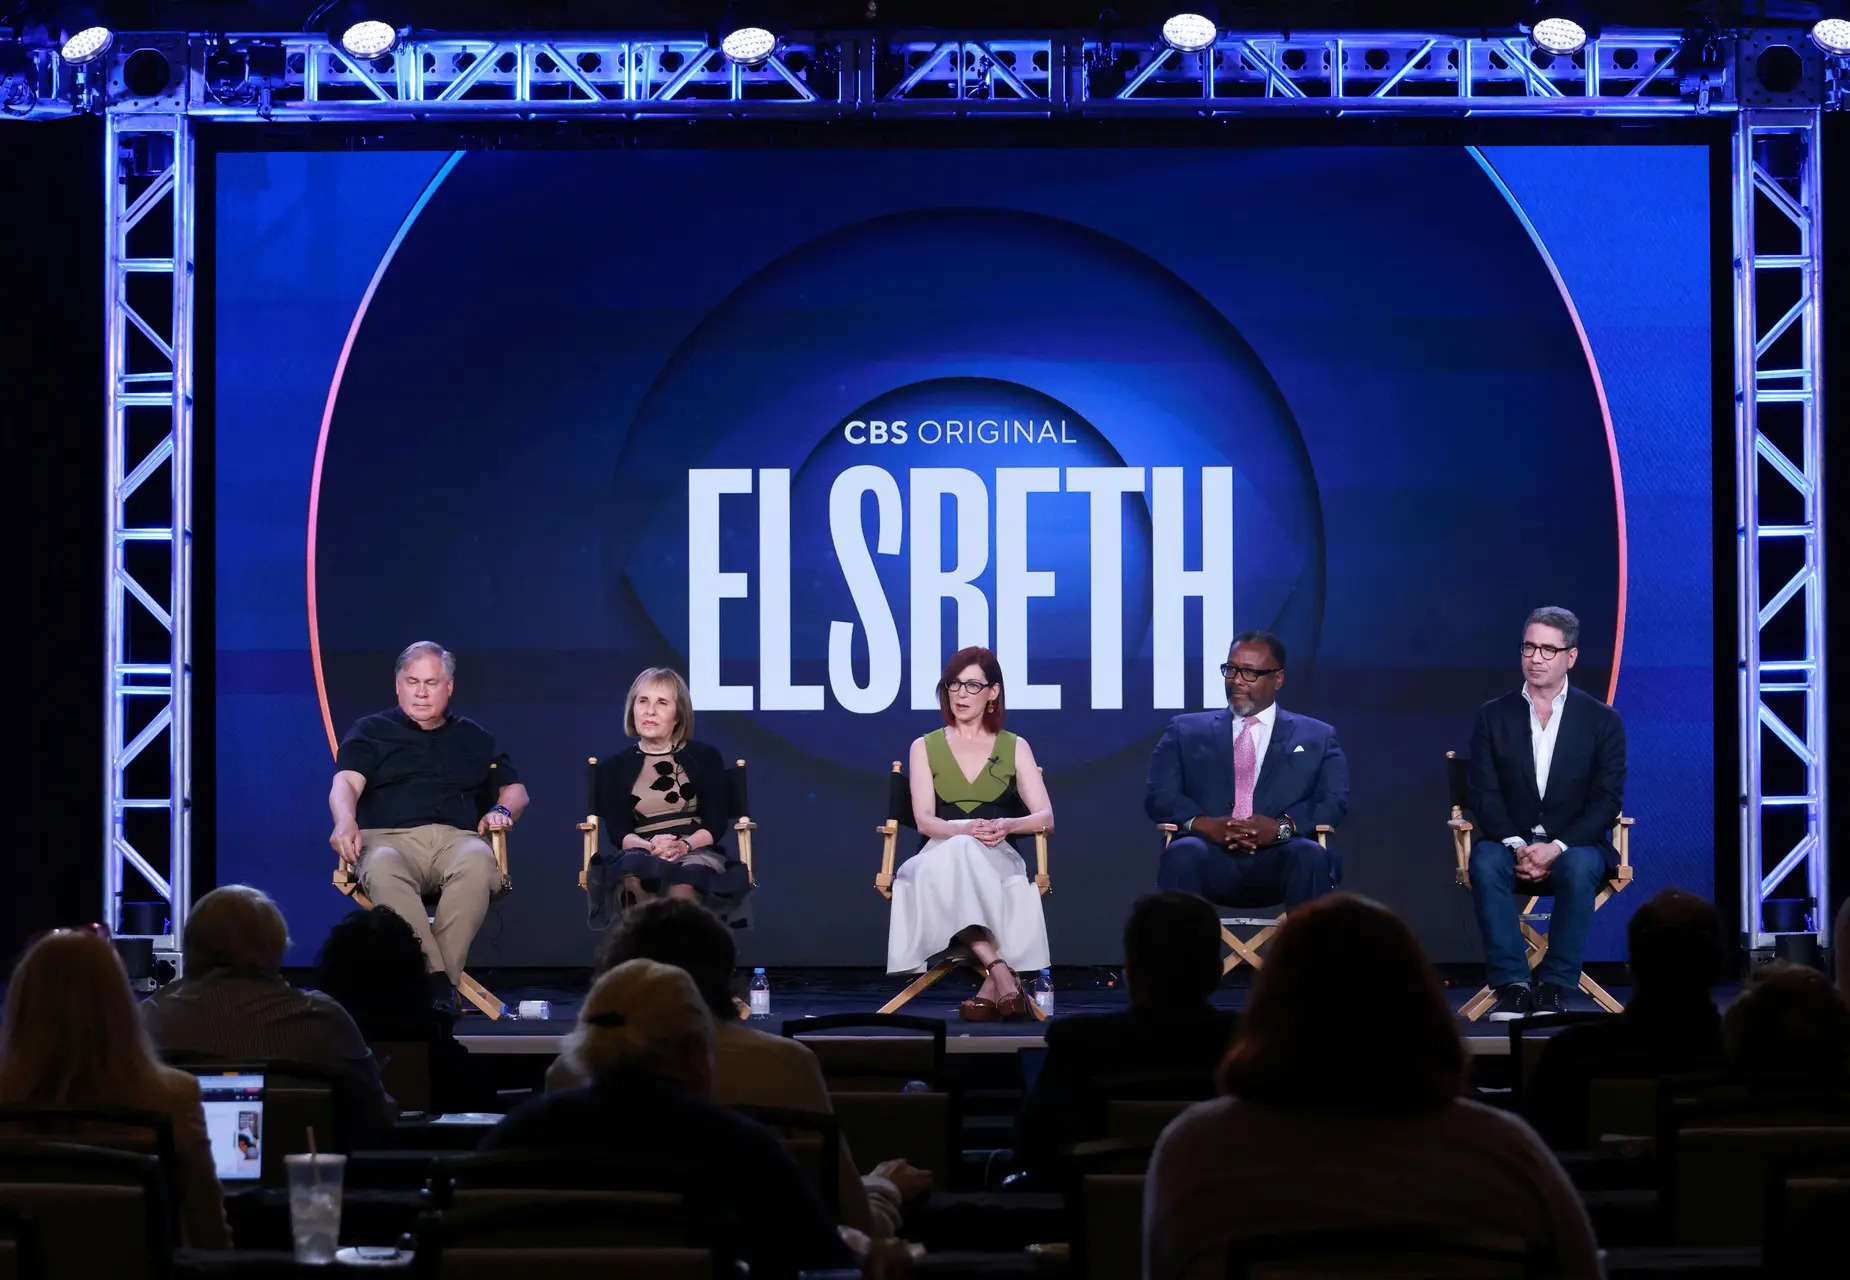 Elsbeth Season 2: Check out release date, time, cast and characters 